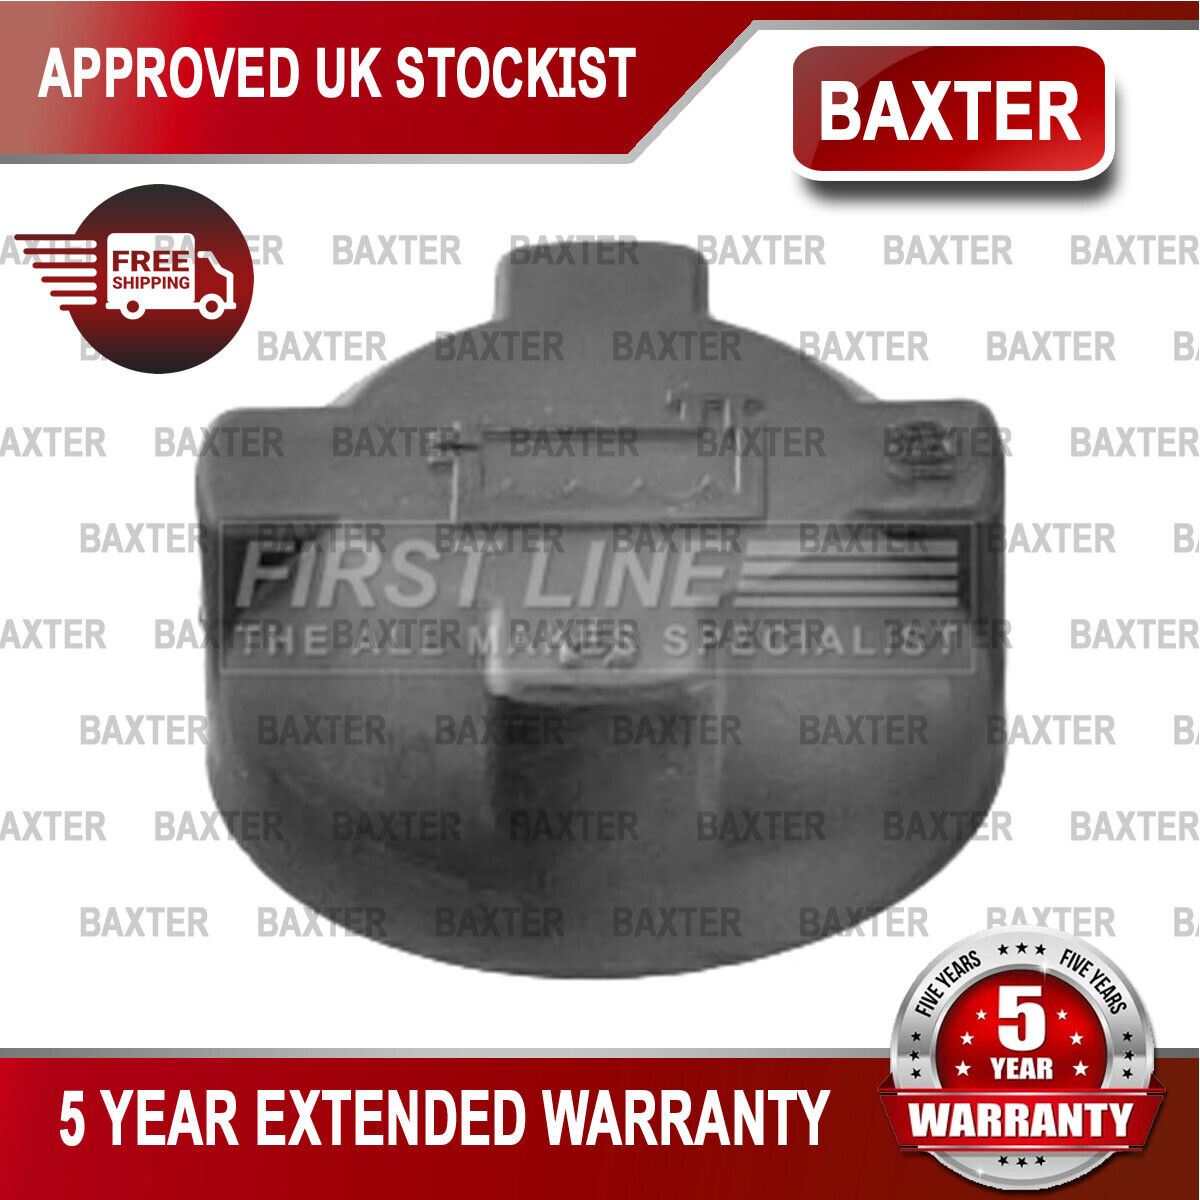 Fits Smart Fortwo 2004- City-Coupe 1998-2004 Baxter Radiator Cap 4505010015